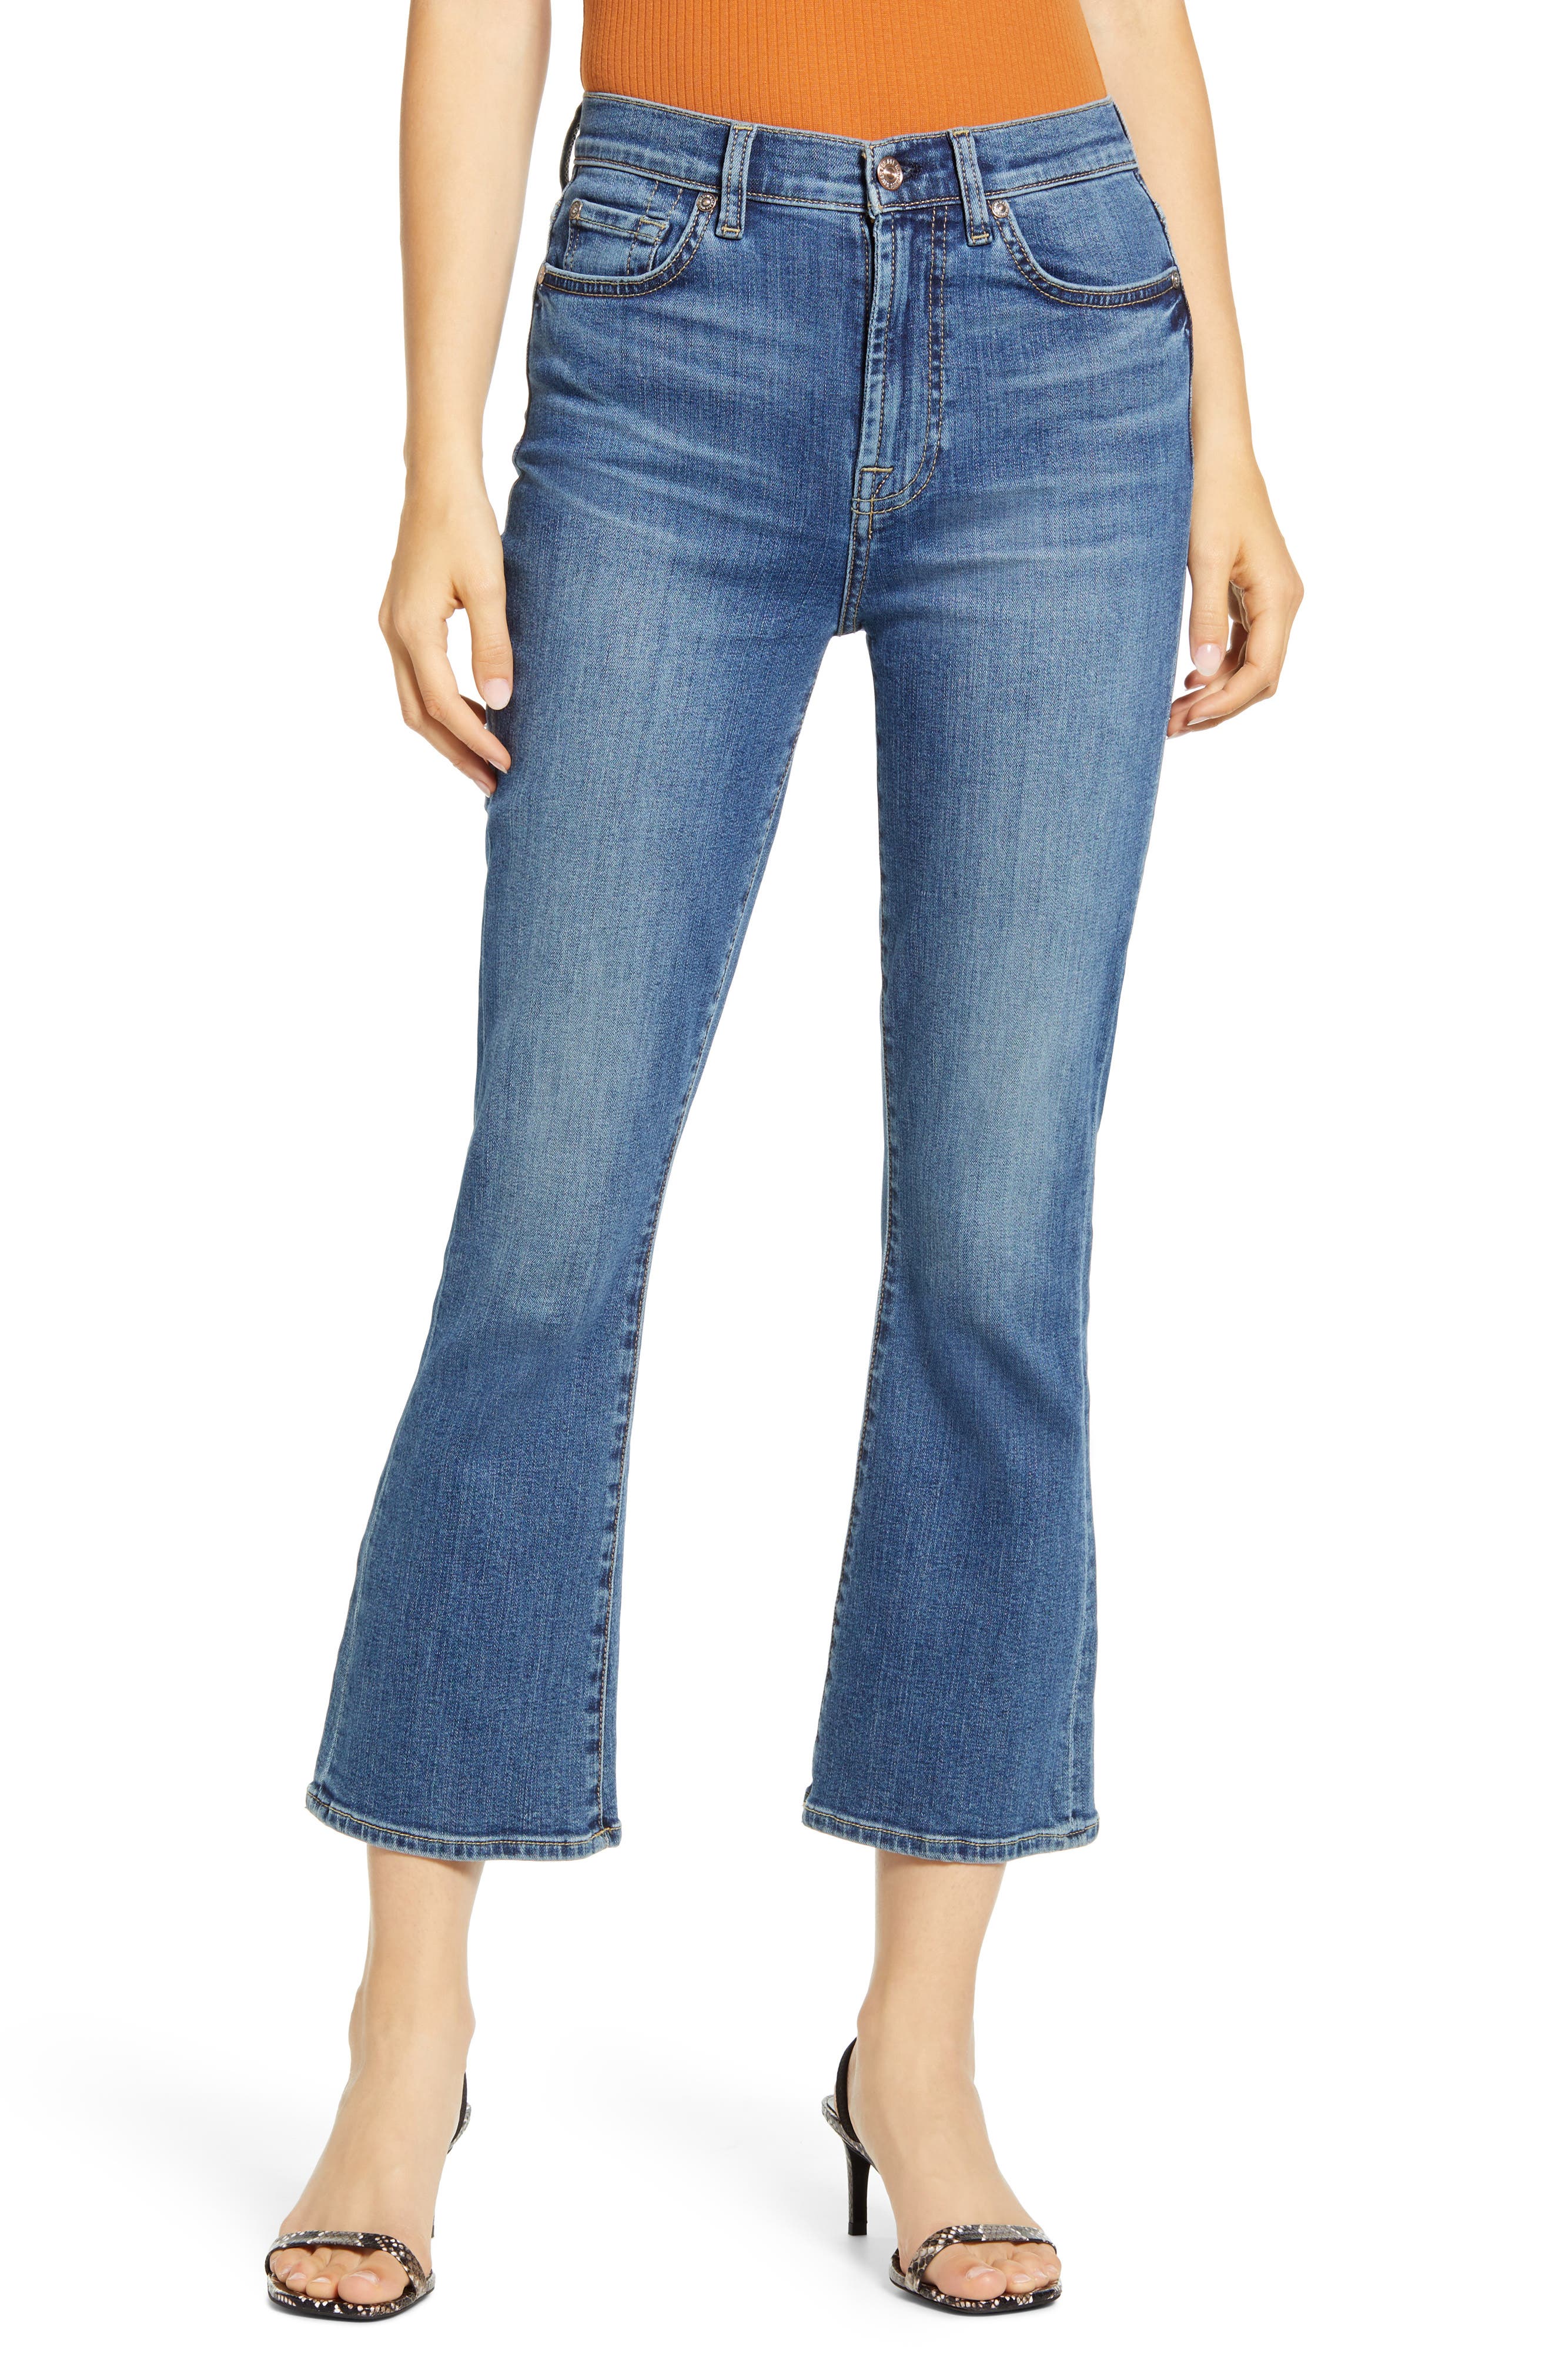 jeans by 7 for all mankind